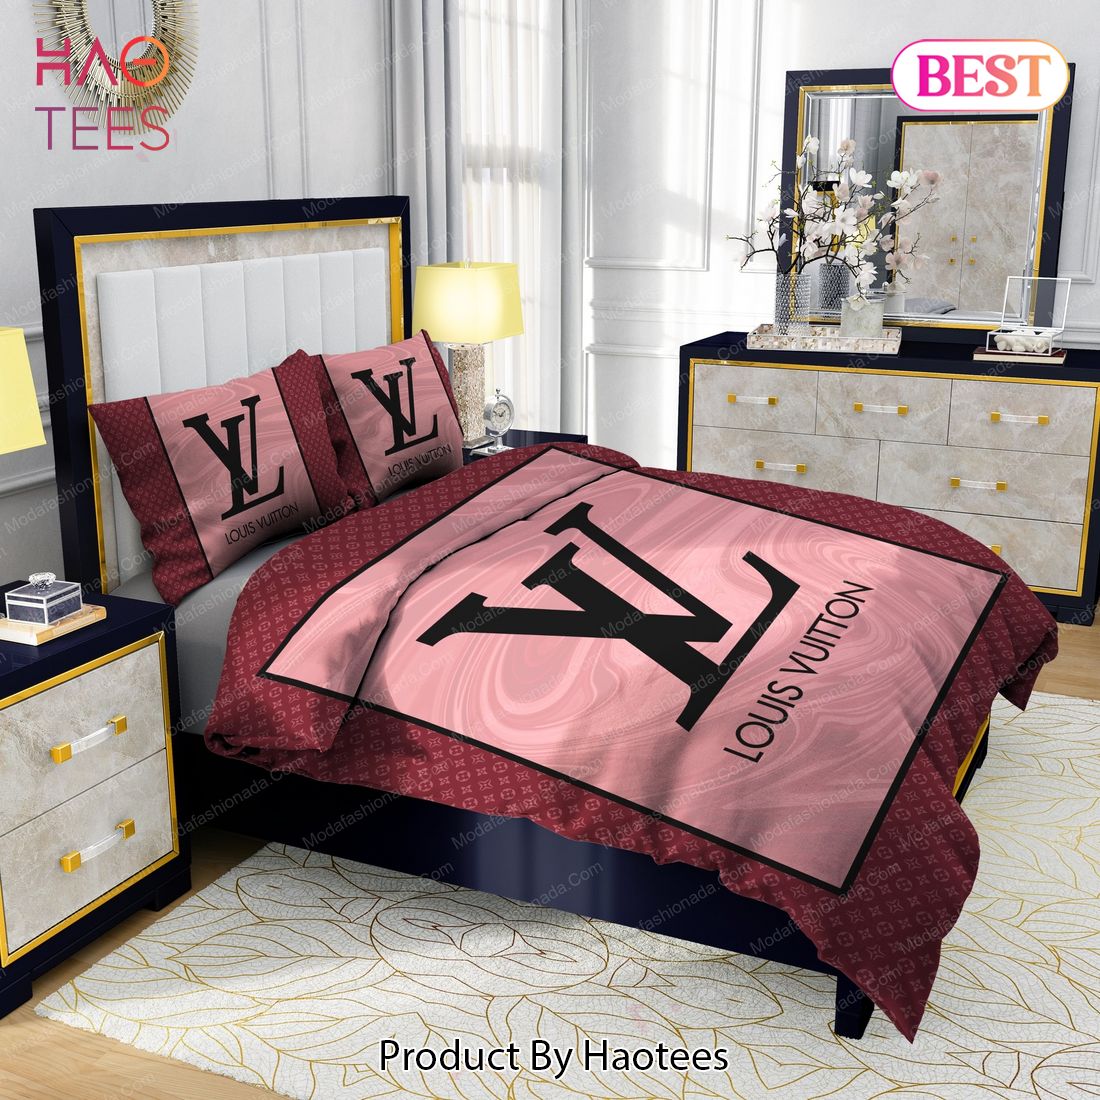 Buy Pink Veinstone Louis Vuitton Bedding Sets Bed sets with Twin, Full,  Queen, King size in 2023